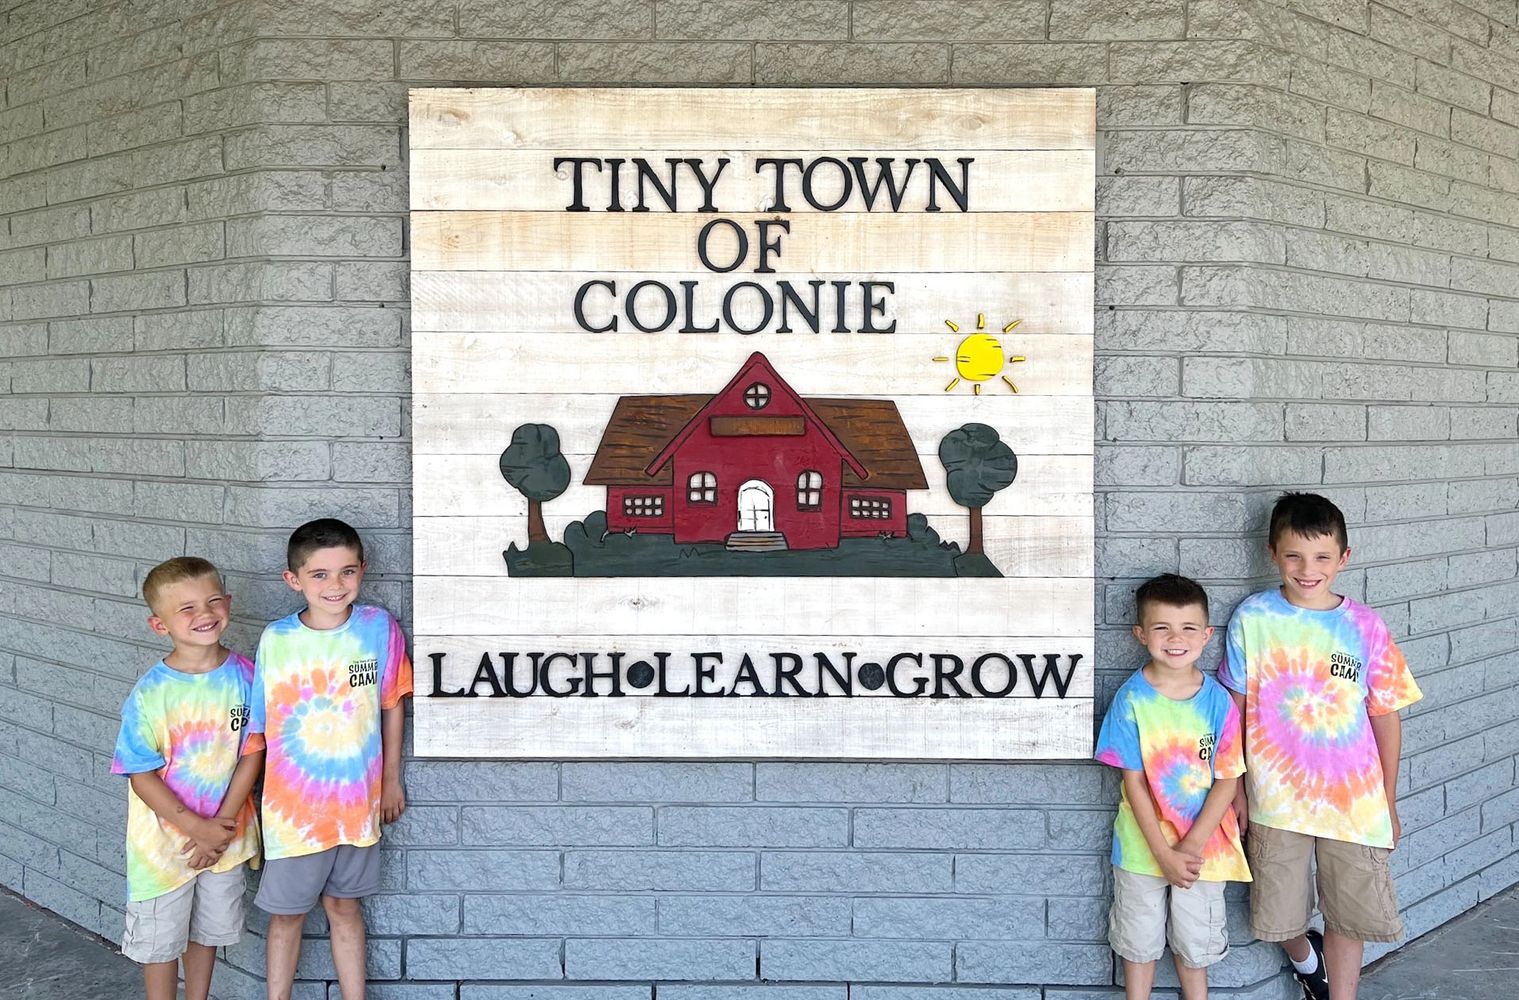 Tiny Town of Colonie laugh learn grow